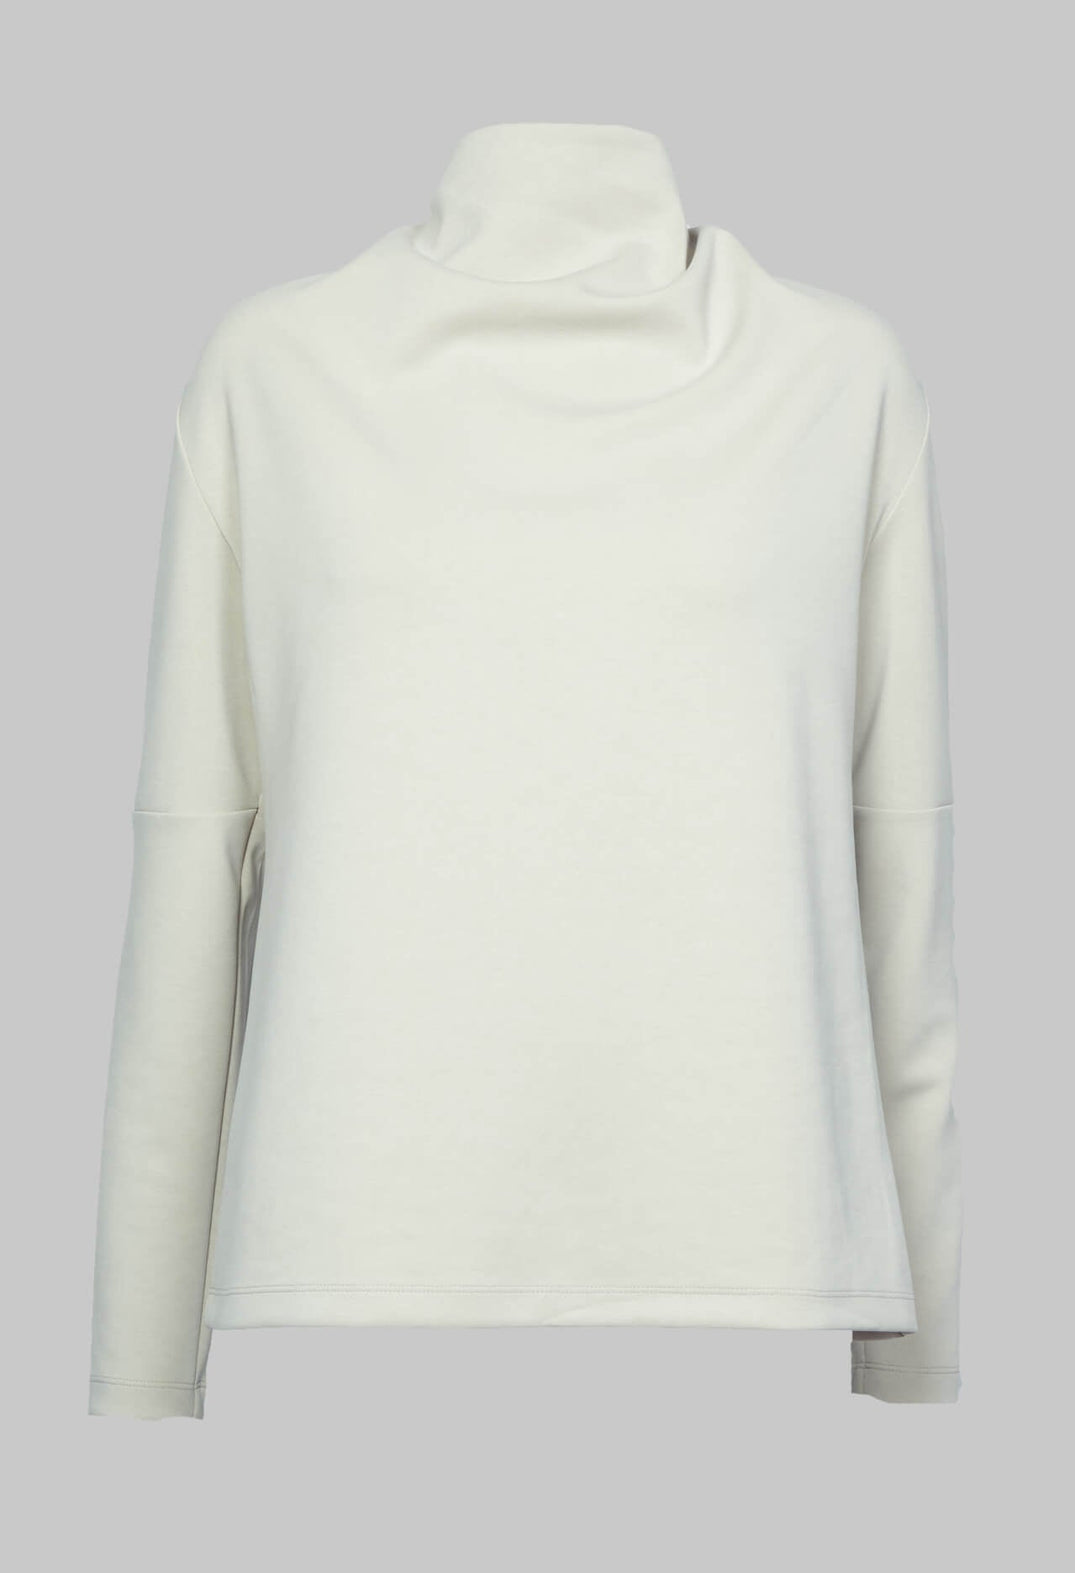 Draped Neck Top with Long Sleeves in Off White